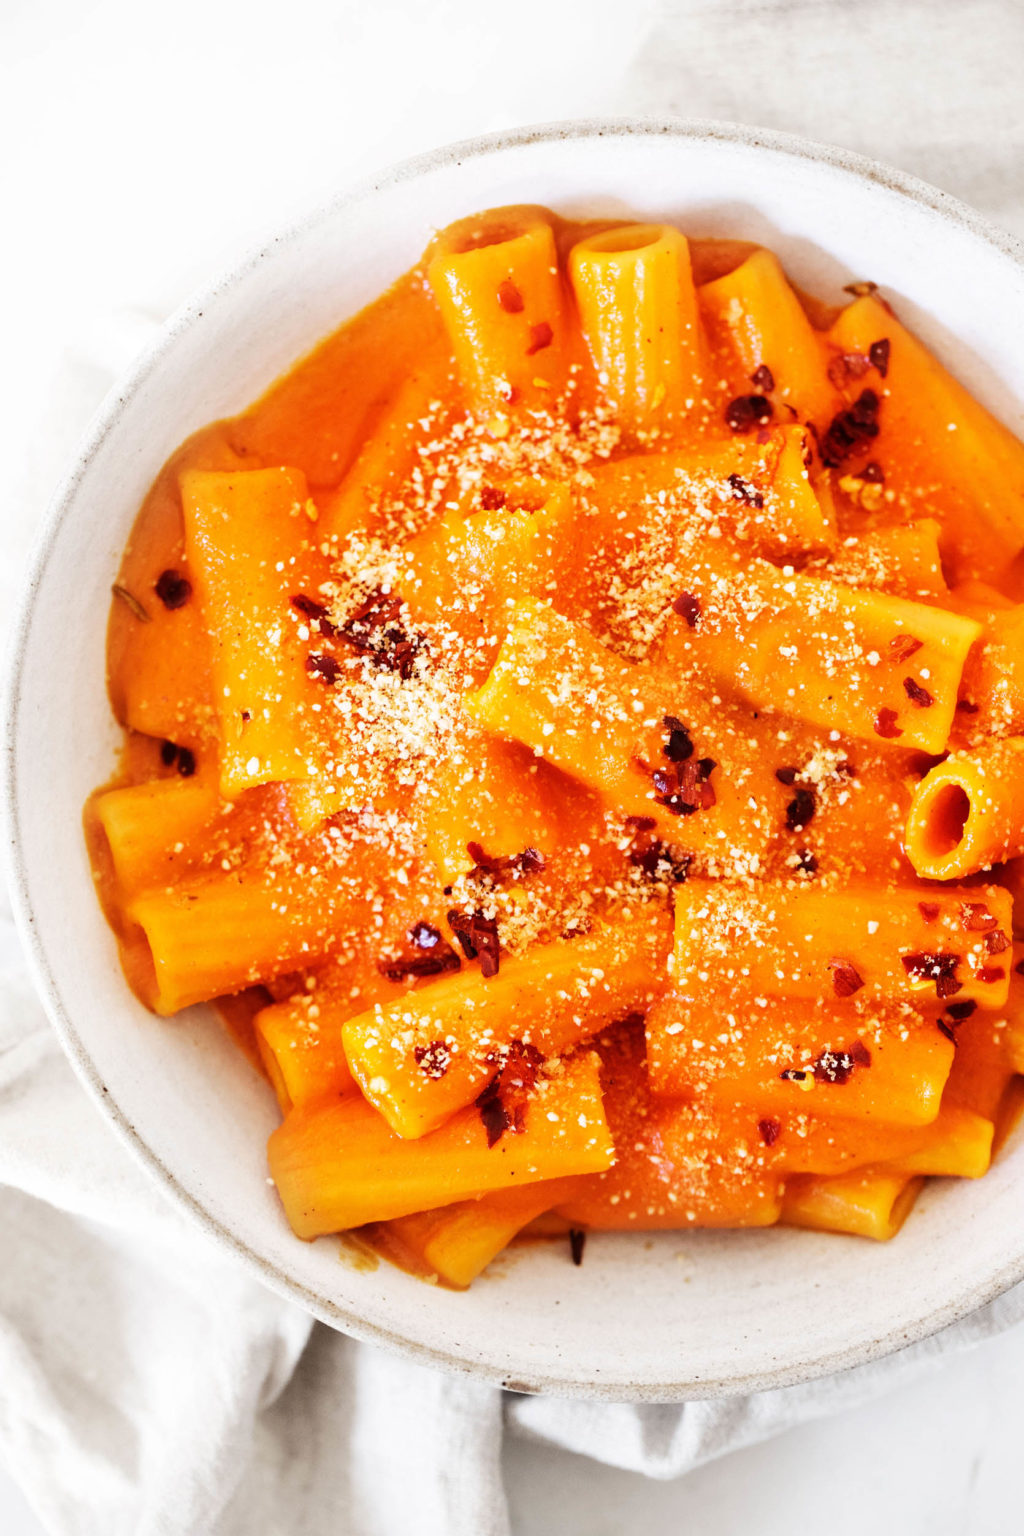 A close up image of a pasta dish with a rich, creamy tomato sauce and crushed red pepper flakes on top.